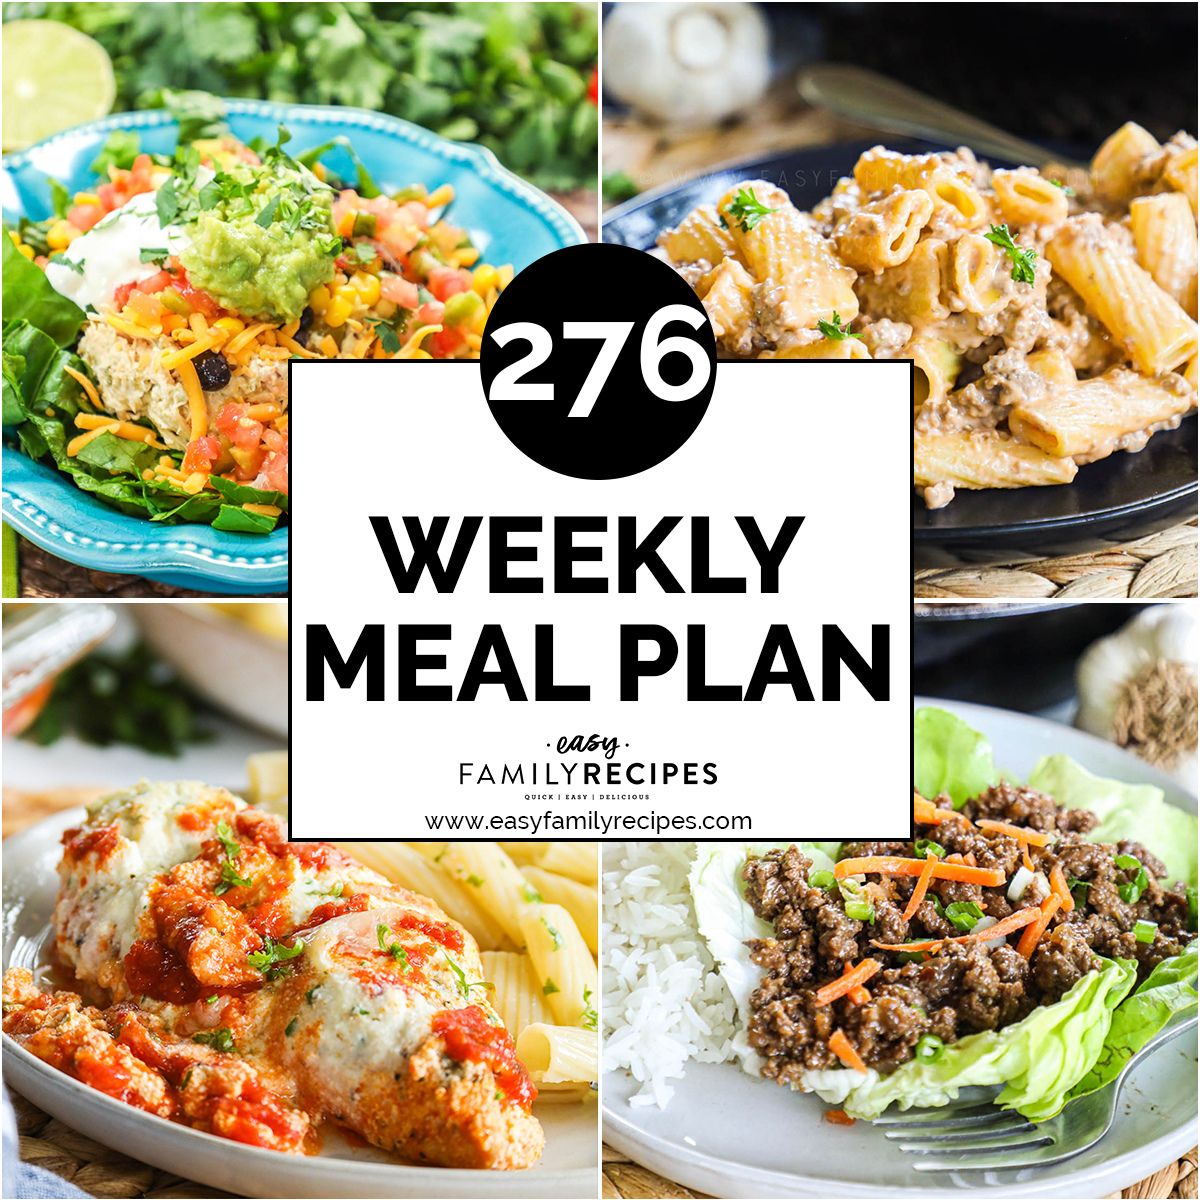 4 plated dinners for free meal plan #276